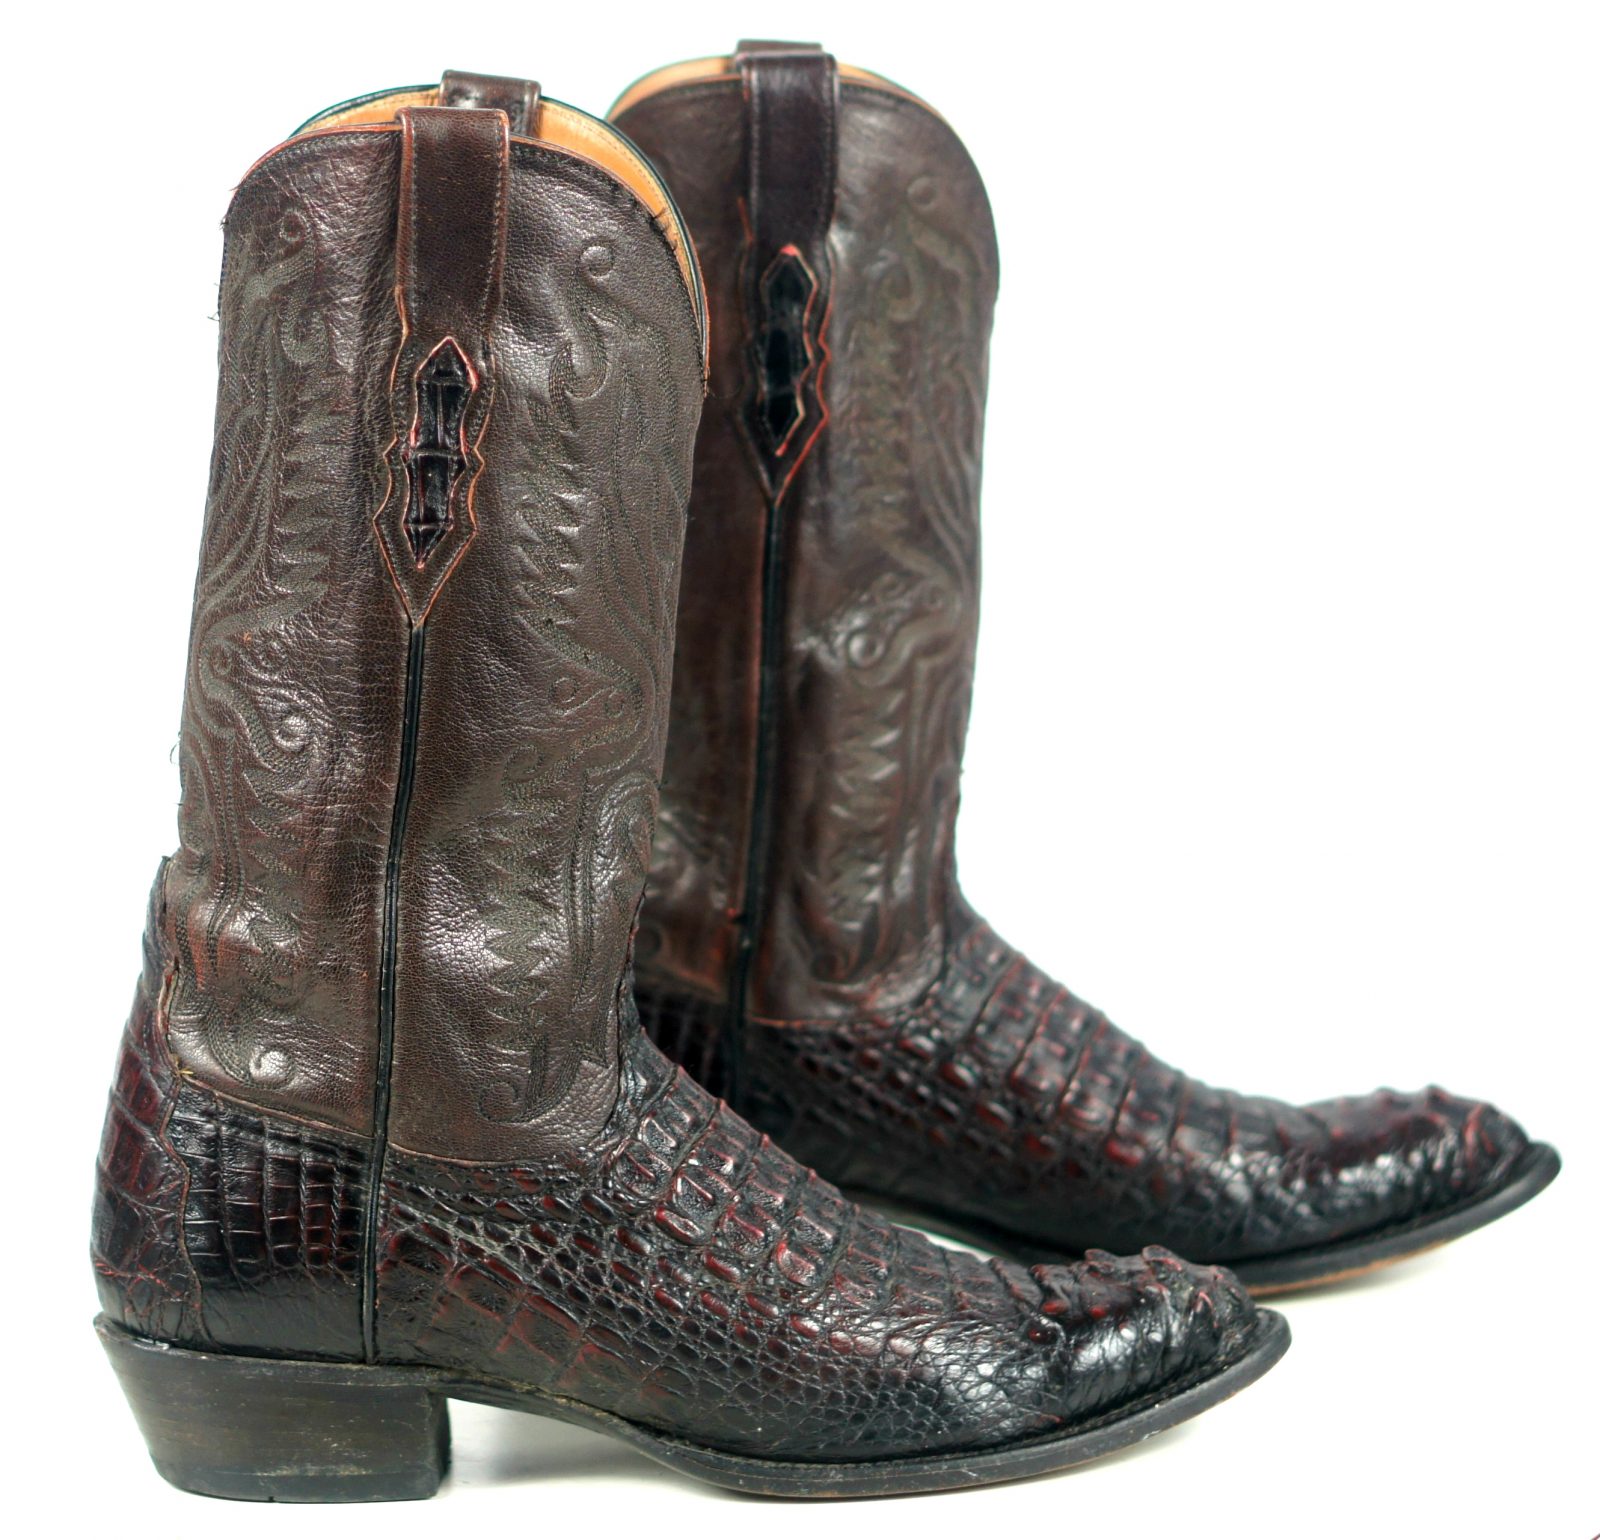 Lucchese 2000 Caiman Alligator Exotic Cowboy Western Boots Rock N Roll ...